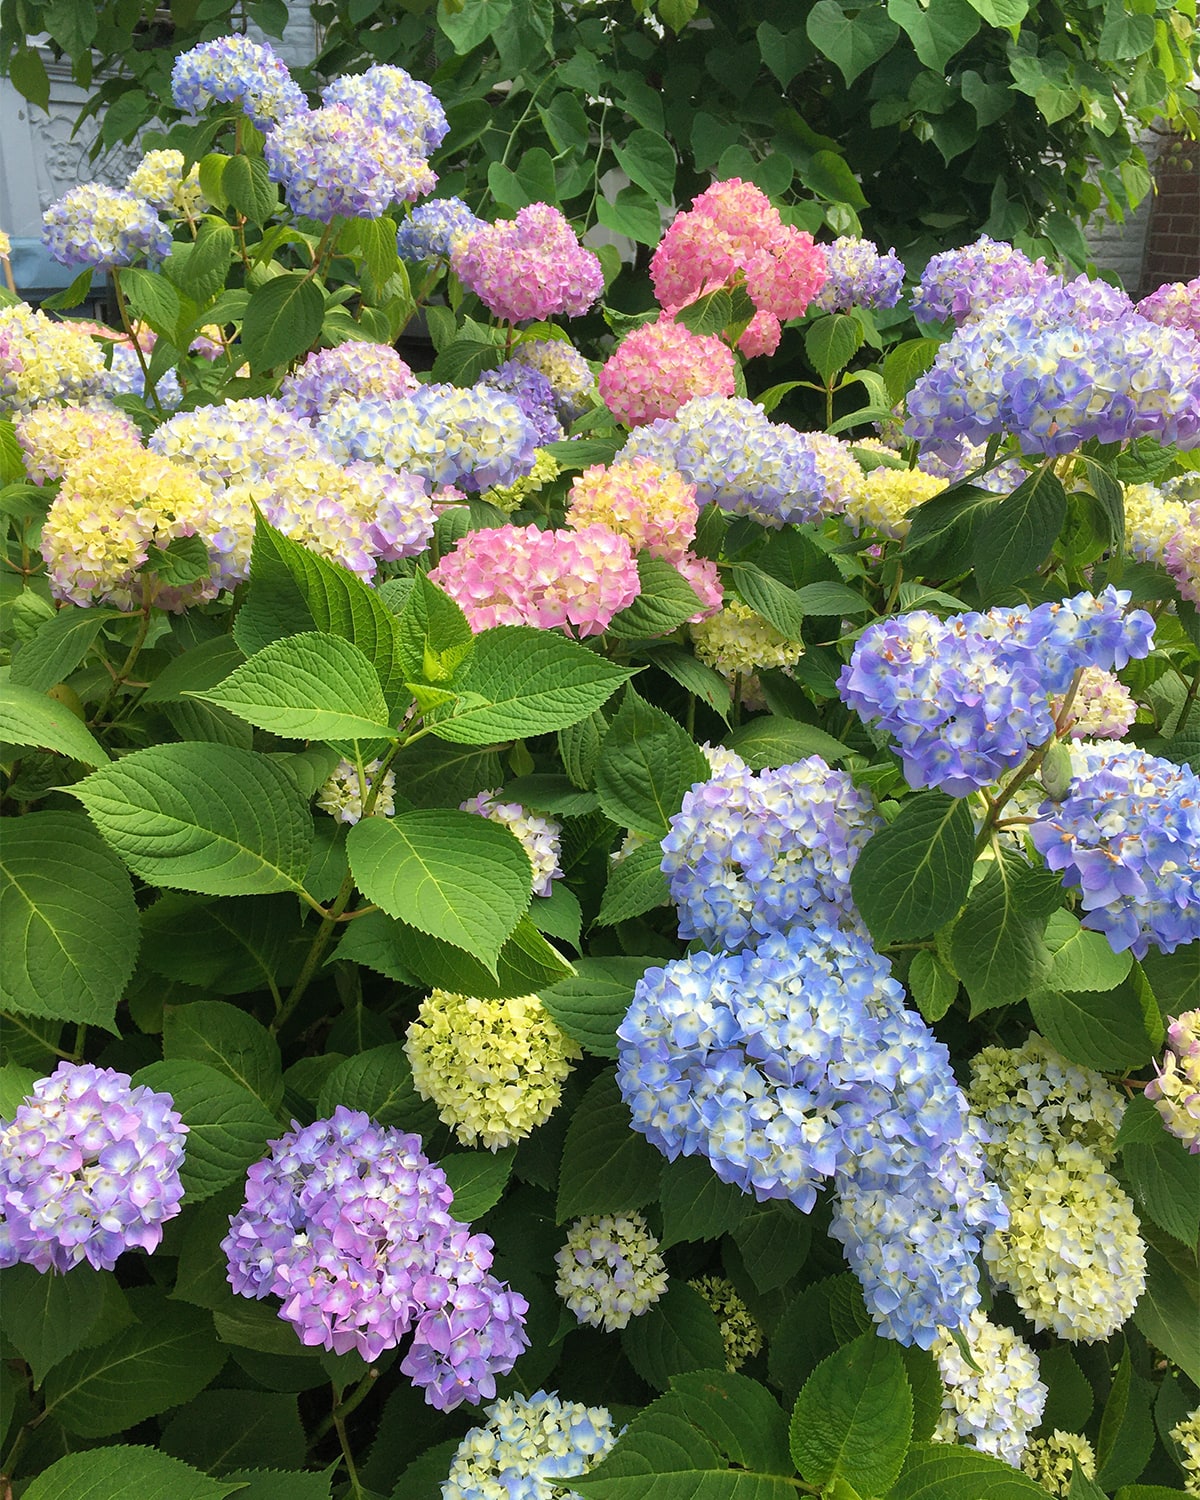 A photo of a bush of hydrangeas, or ajisai. Taken outside, over the fence of a nearby home. The ajisai are super colorful, in white/yellow, pink, light blue and violet.